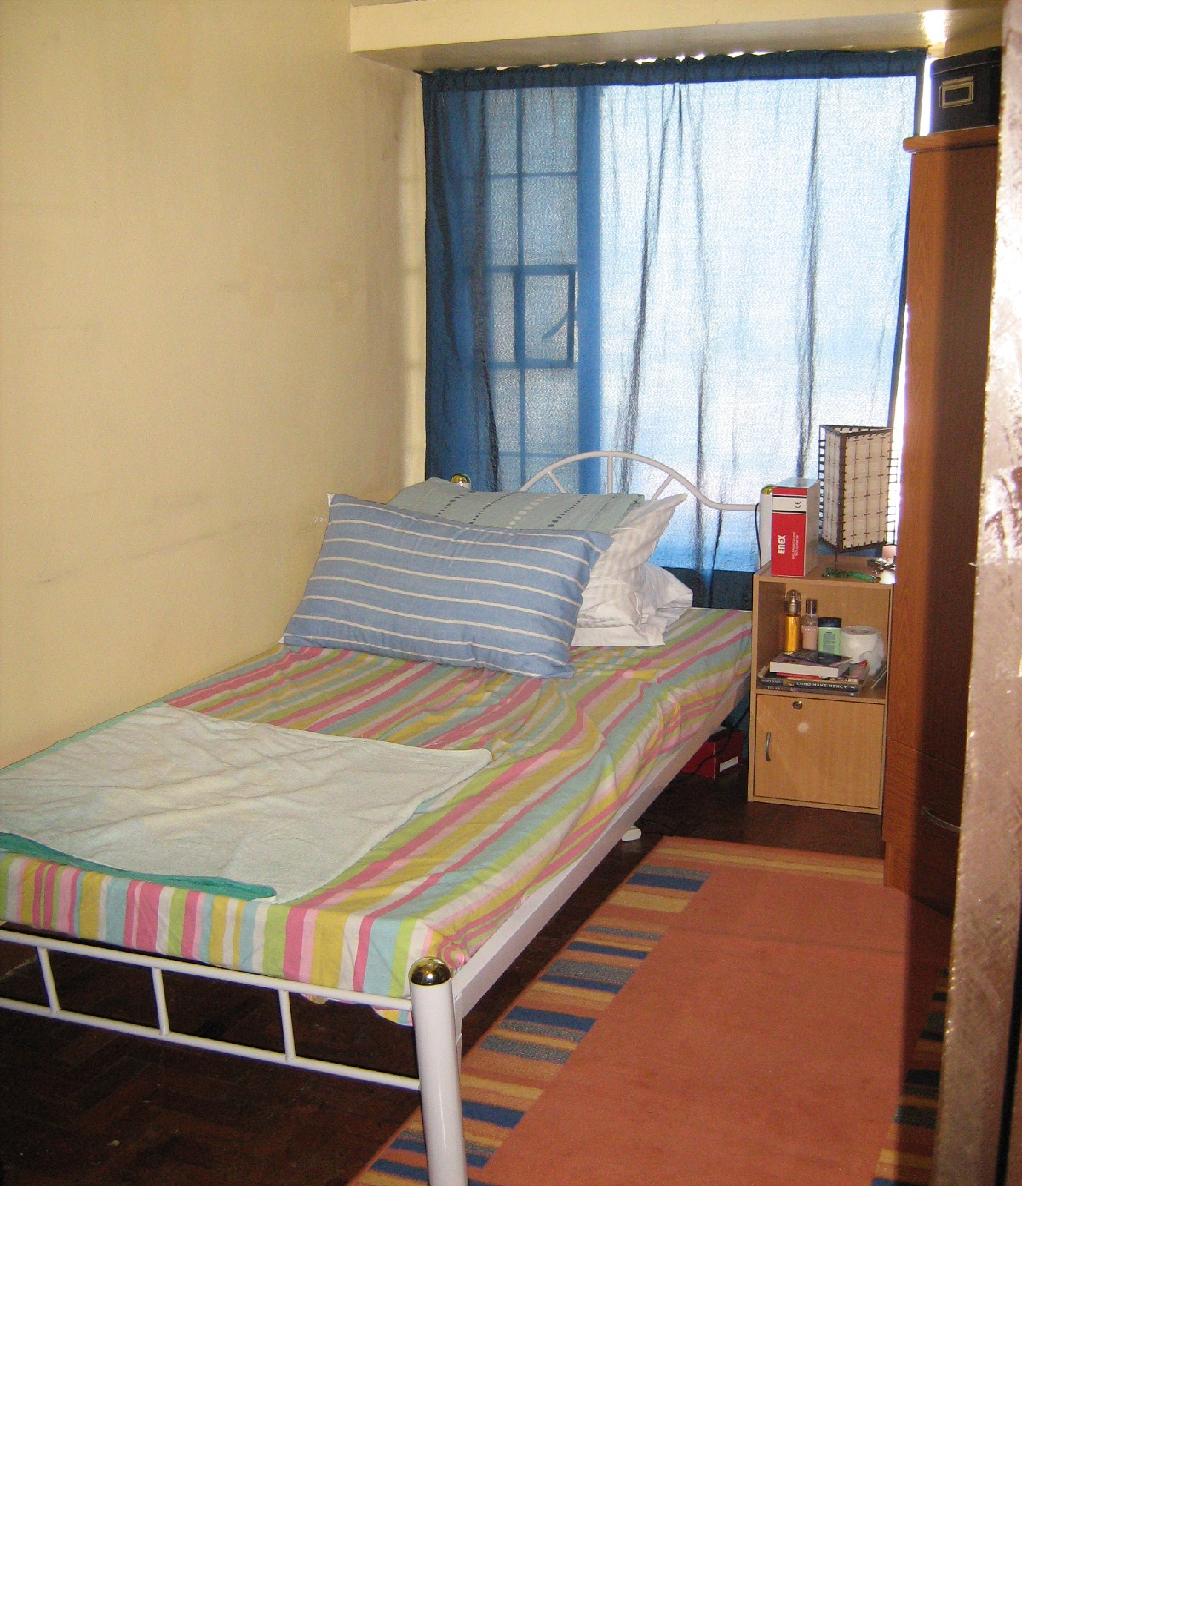 BEDSPACE CONDO ROOM SHARING/ FOR MALE / FEMALE P3, 500 SWIMMING POOL/FURNISHED INCLUSIVE WATER&ELECTRICITY 0916-5303557